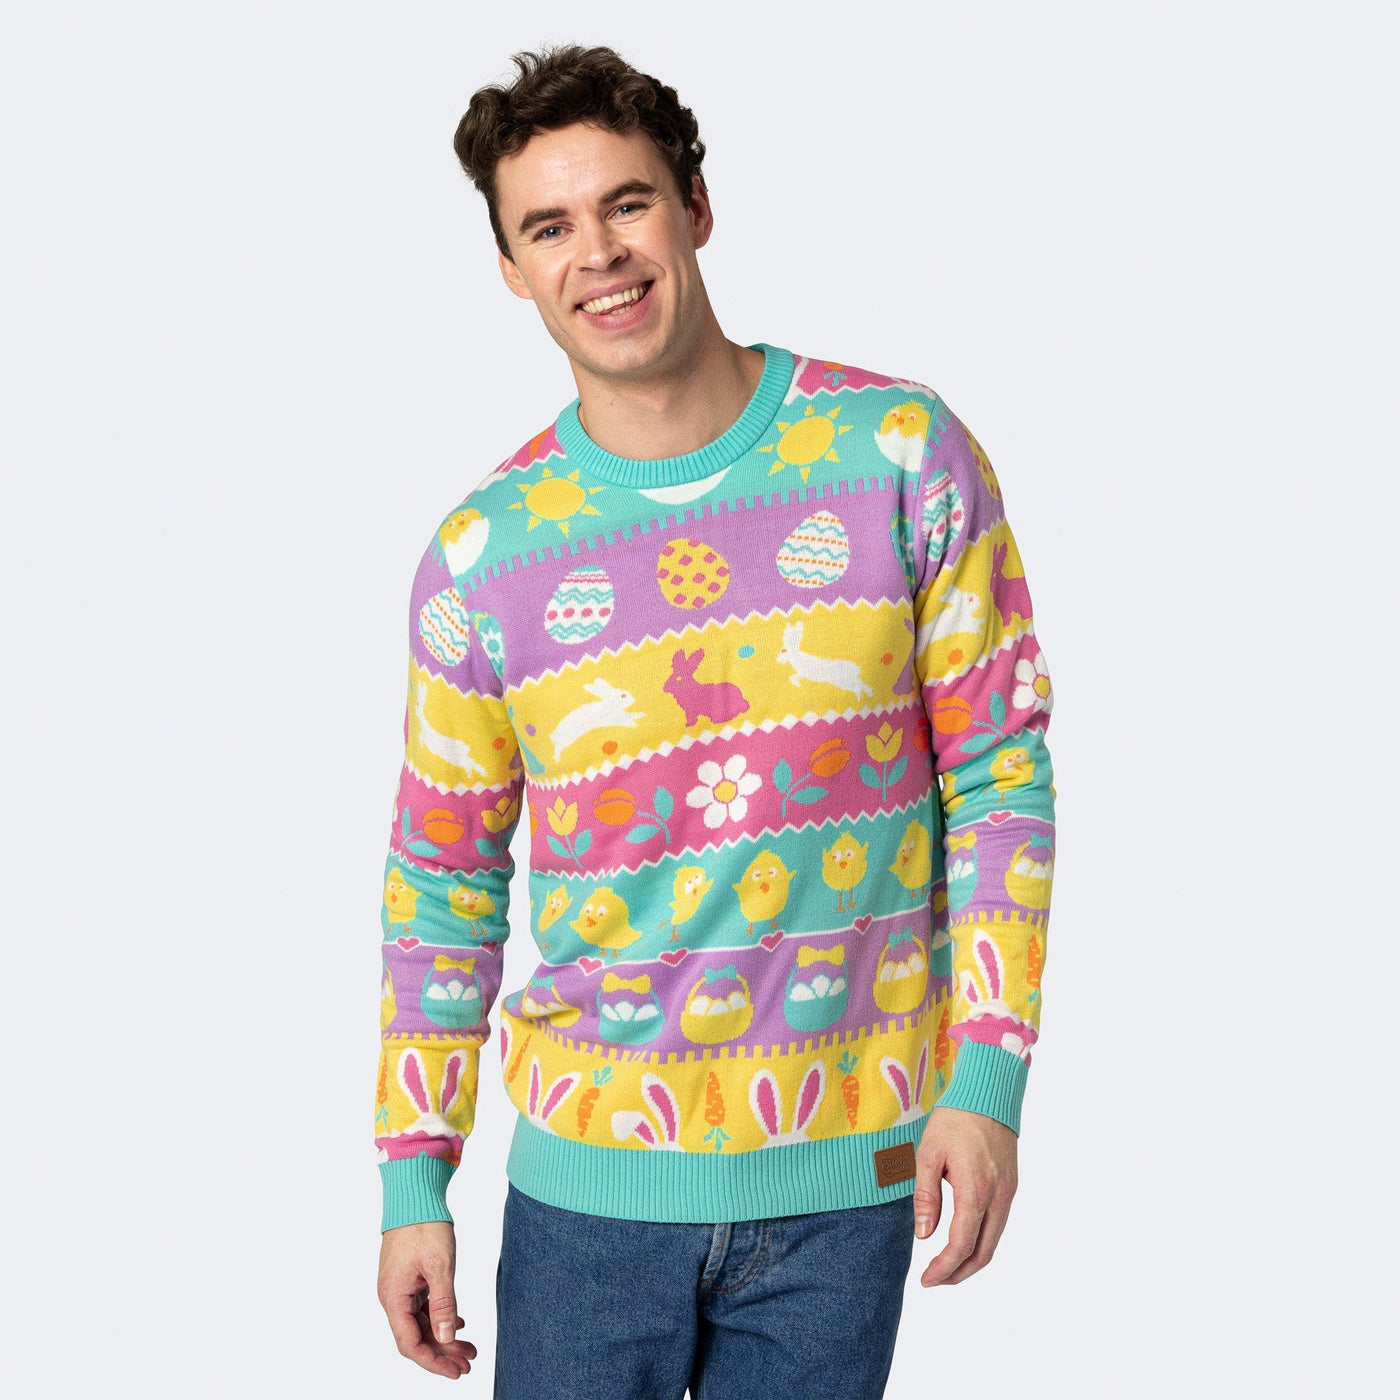 Mens Striped Easter Sweater - Europe's largest selection